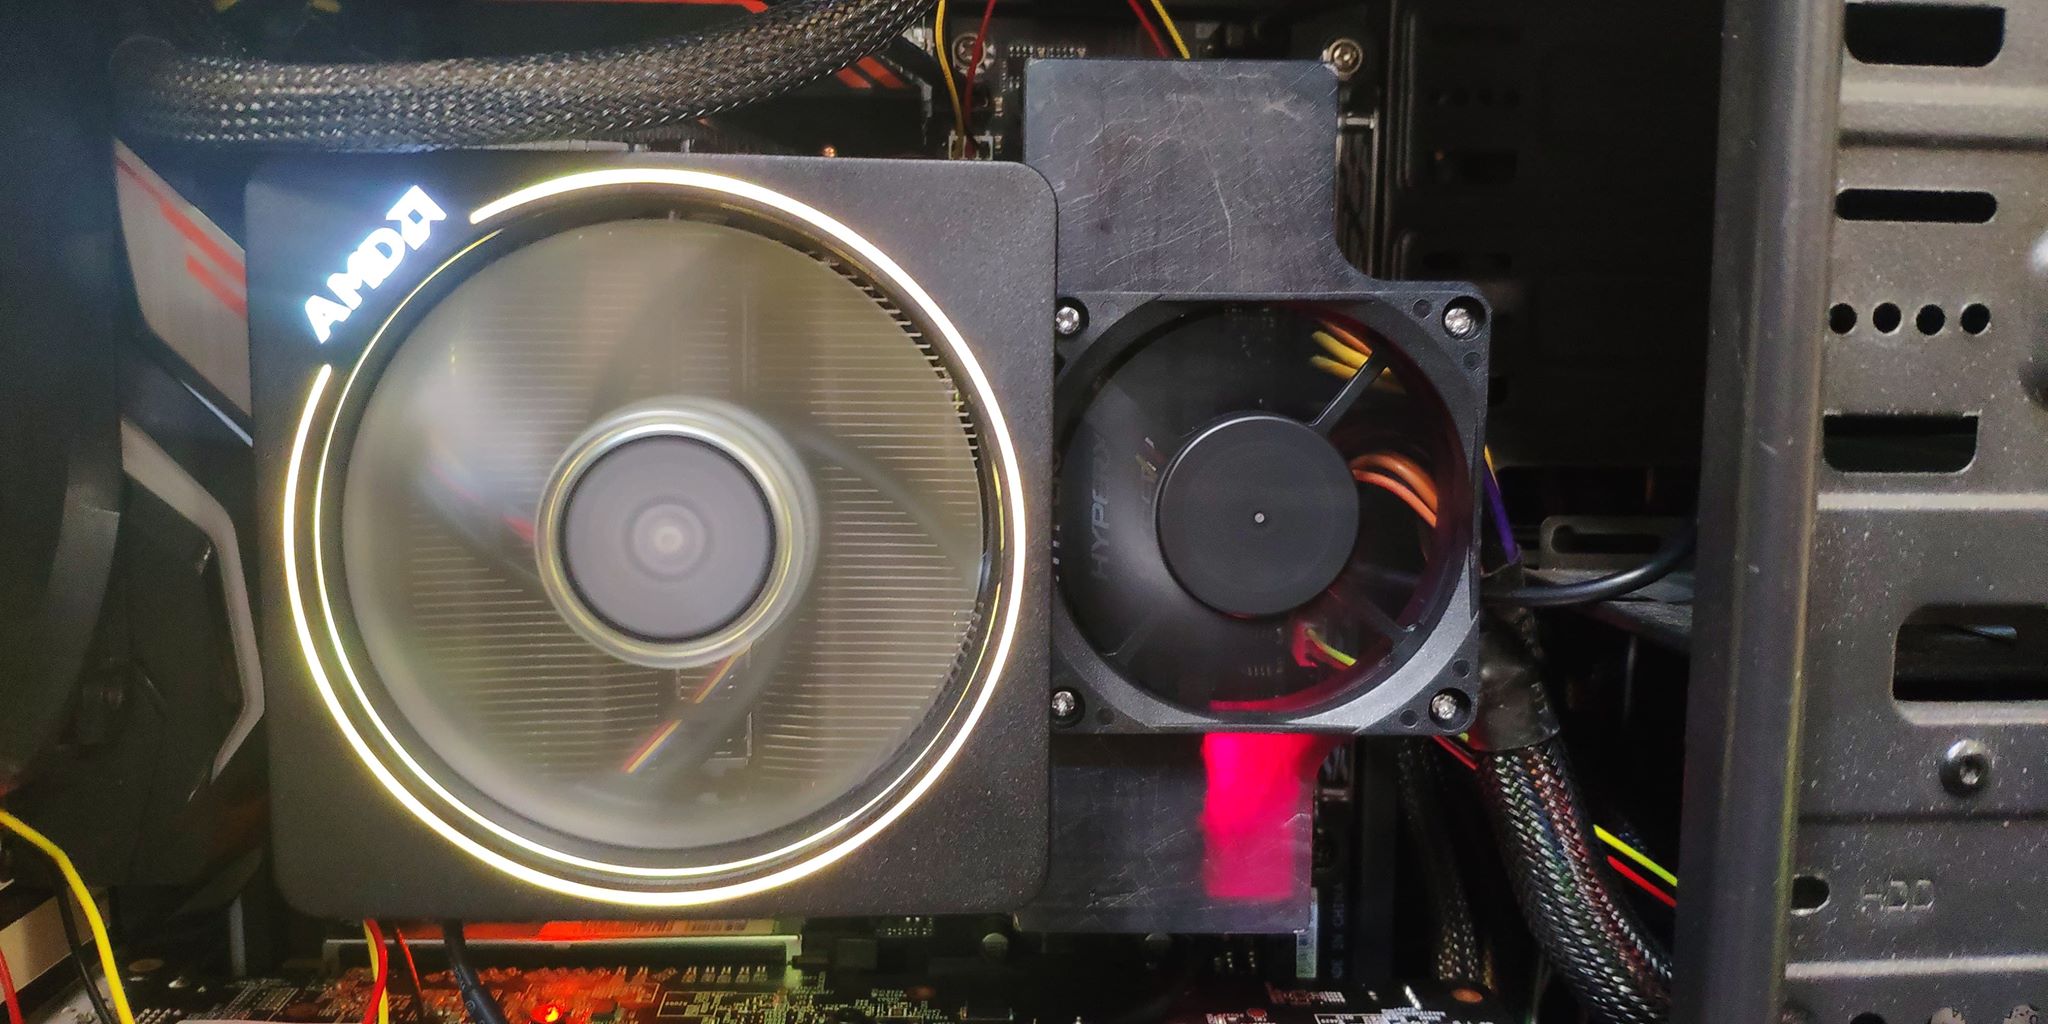 PC FAN COOLING COVER